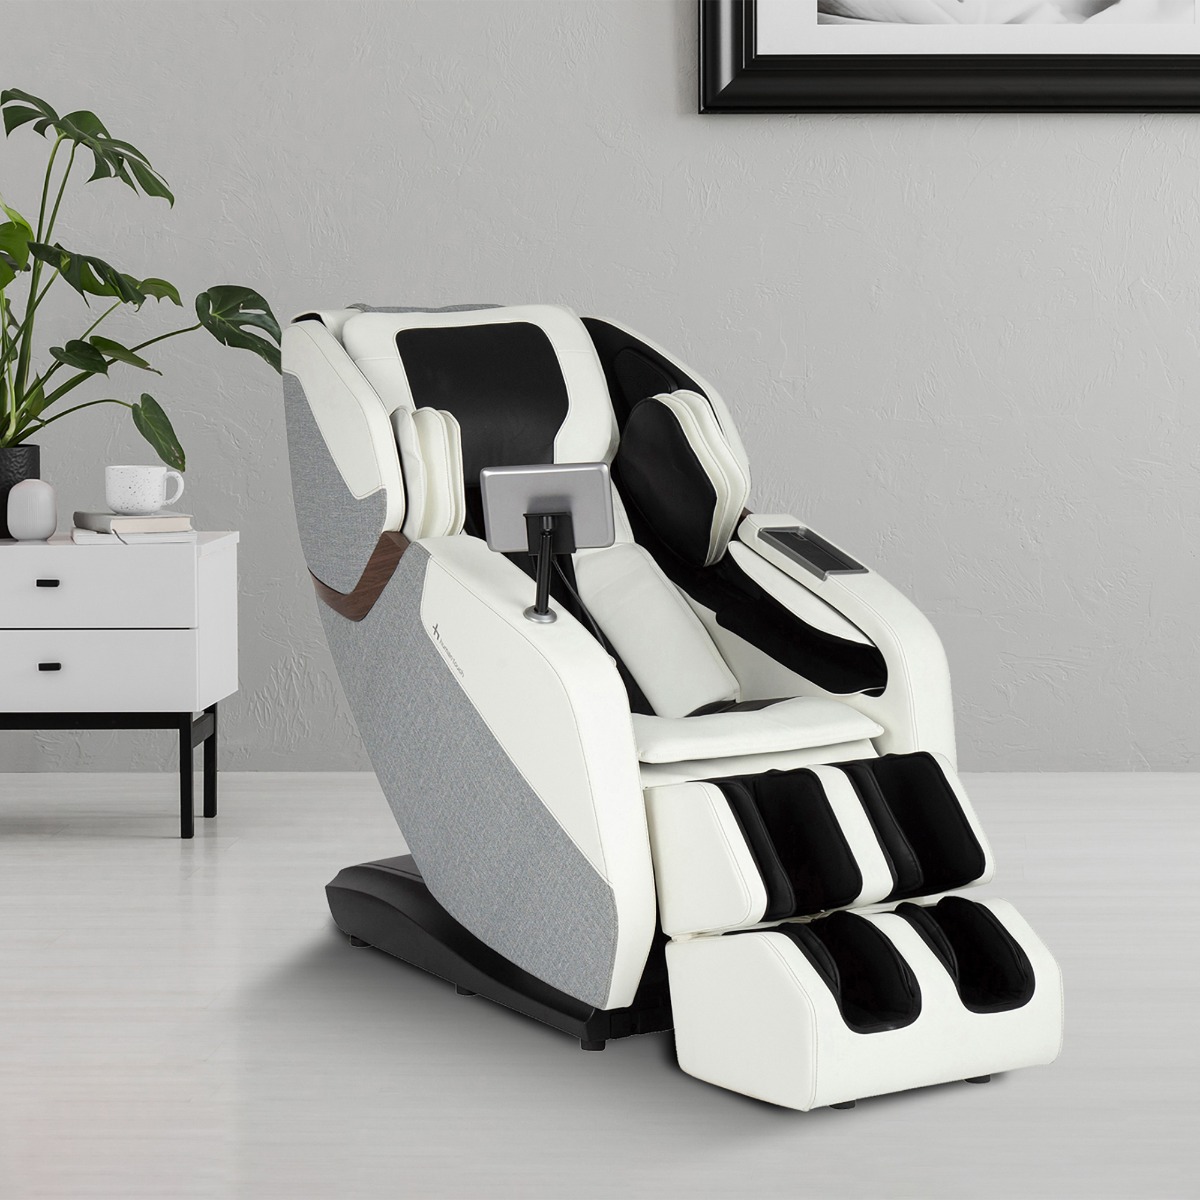 WholeBody ROVE Massage Chair in Moon